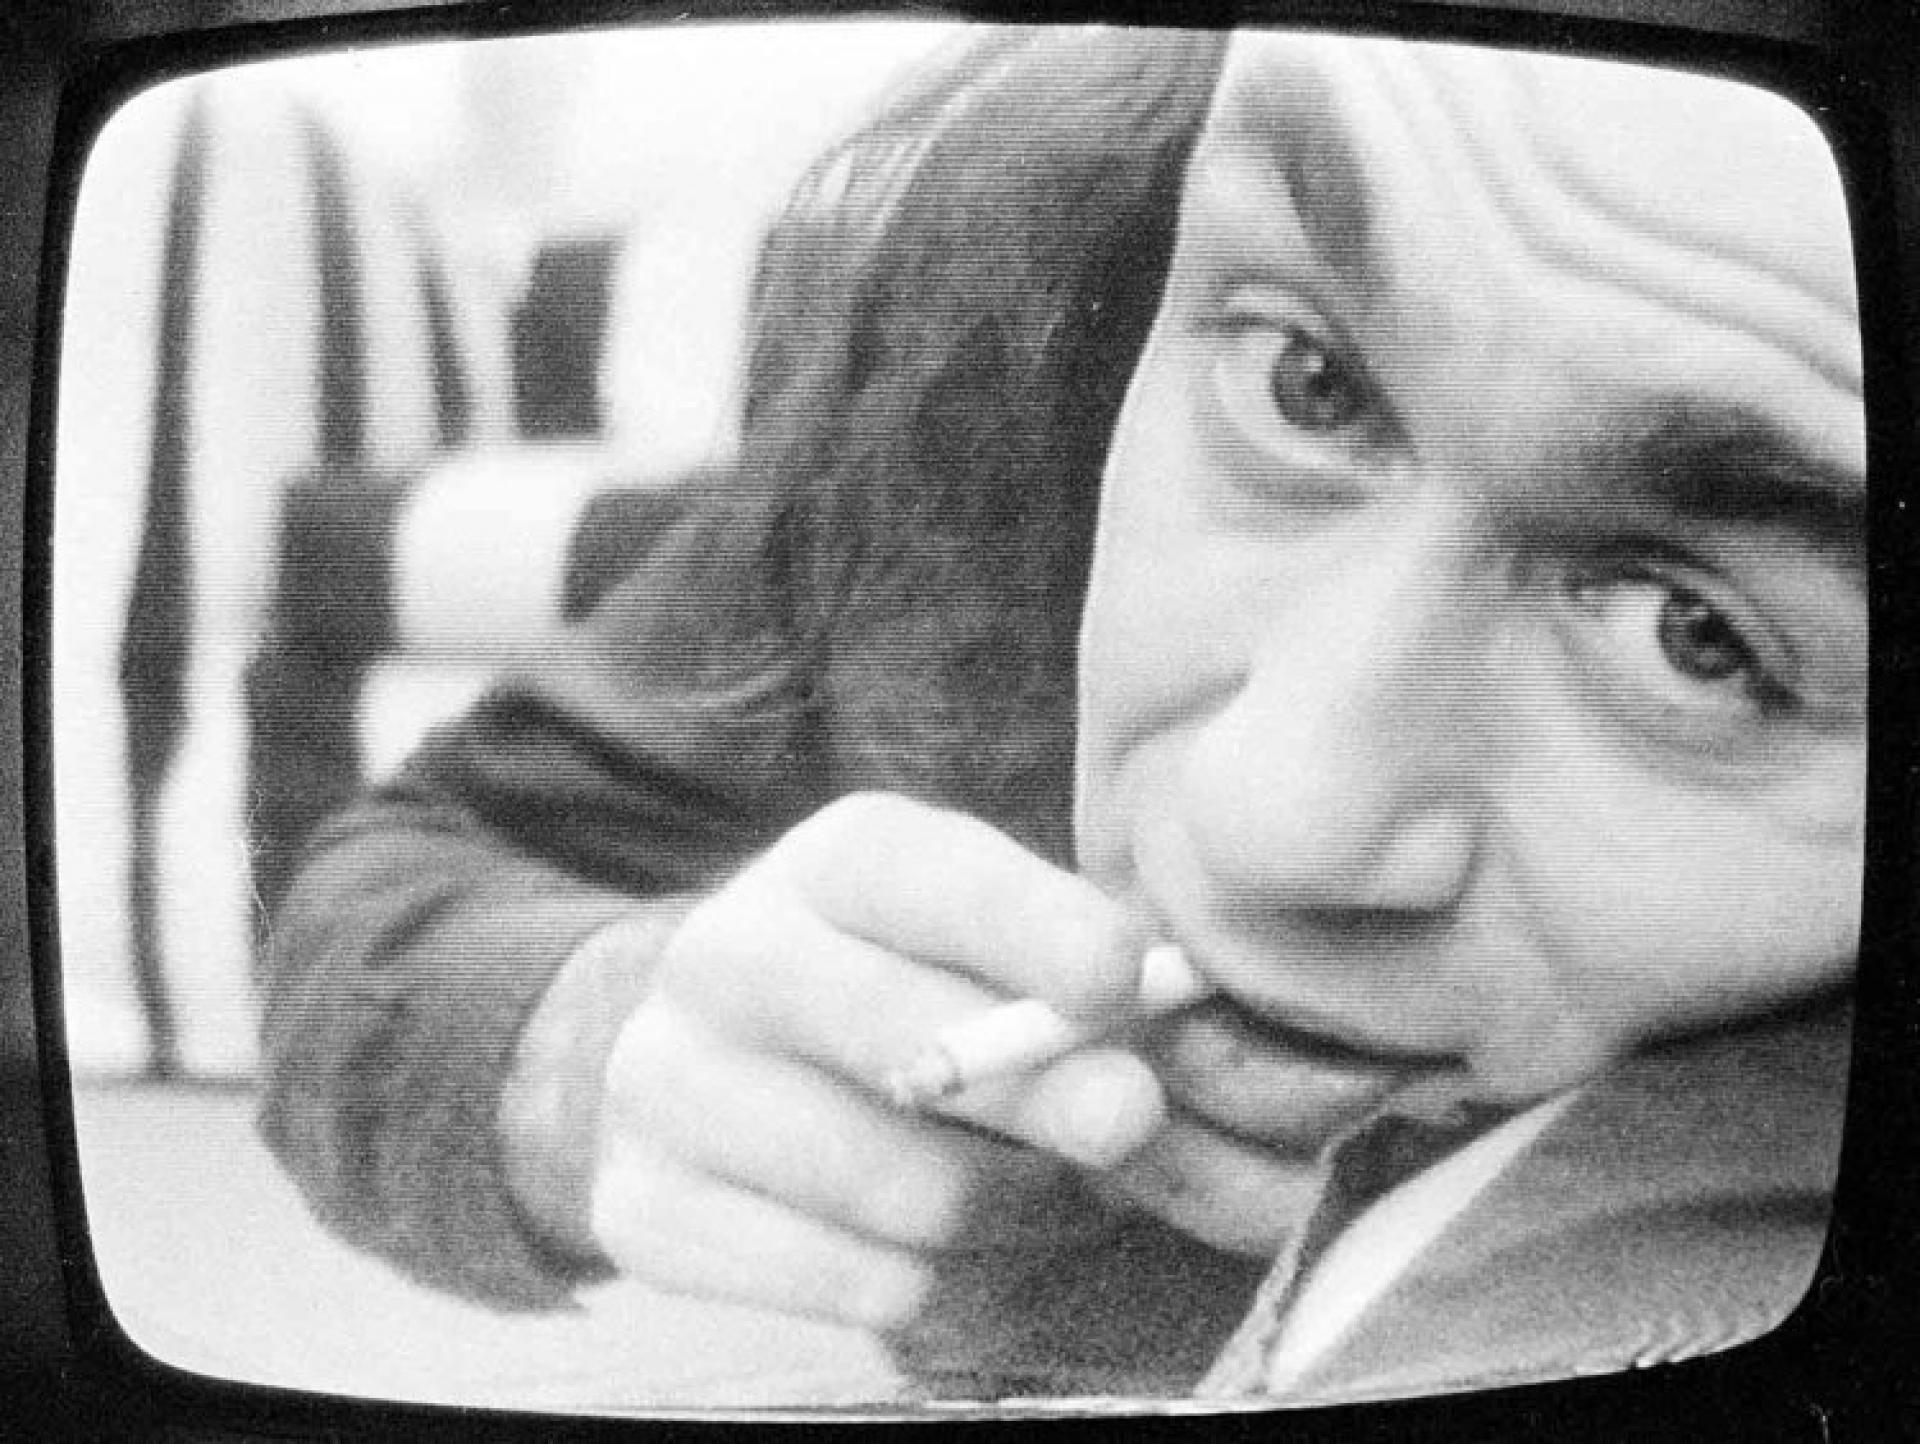 Acconci’s confessional films portray his face larger than life and soft whispers. The viewer joins an interior with the work through Acconci, 1960s. | Photo via Acconci Studio